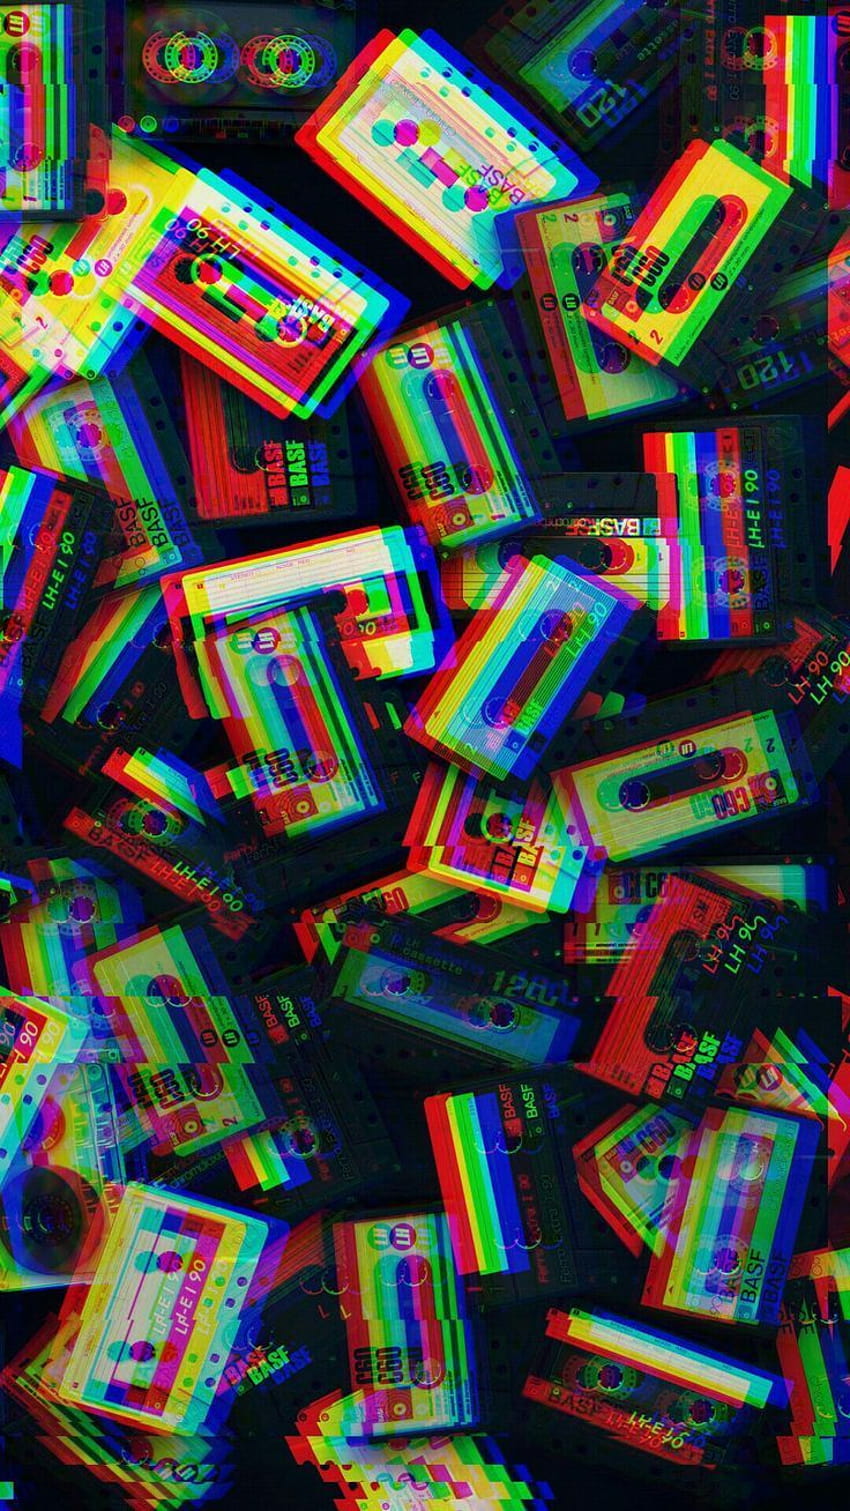 A colorful pile of cassettes - Trippy